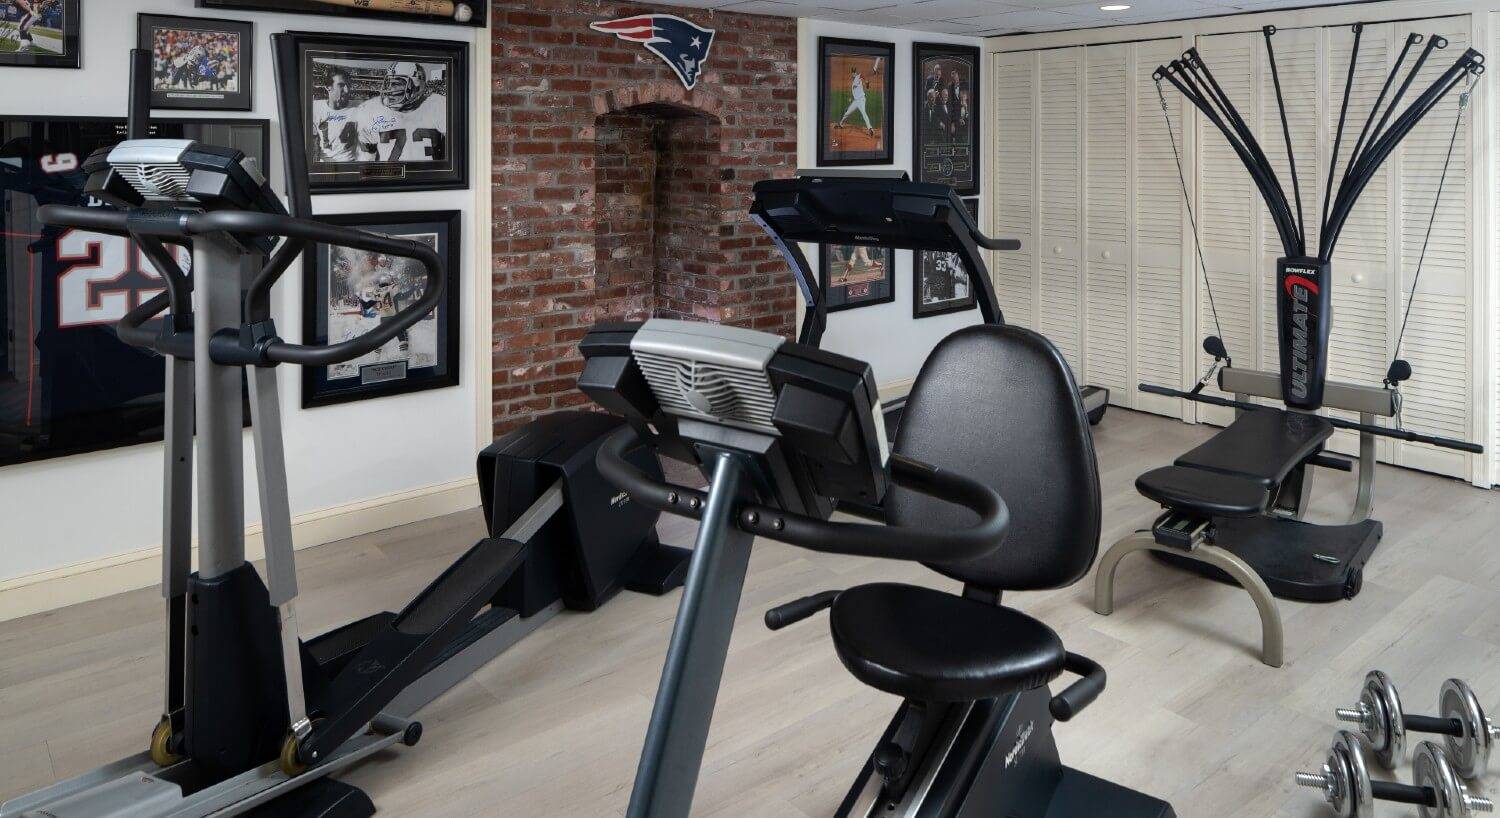 A gym room with various kinds of equipment and sports pictures on the walls